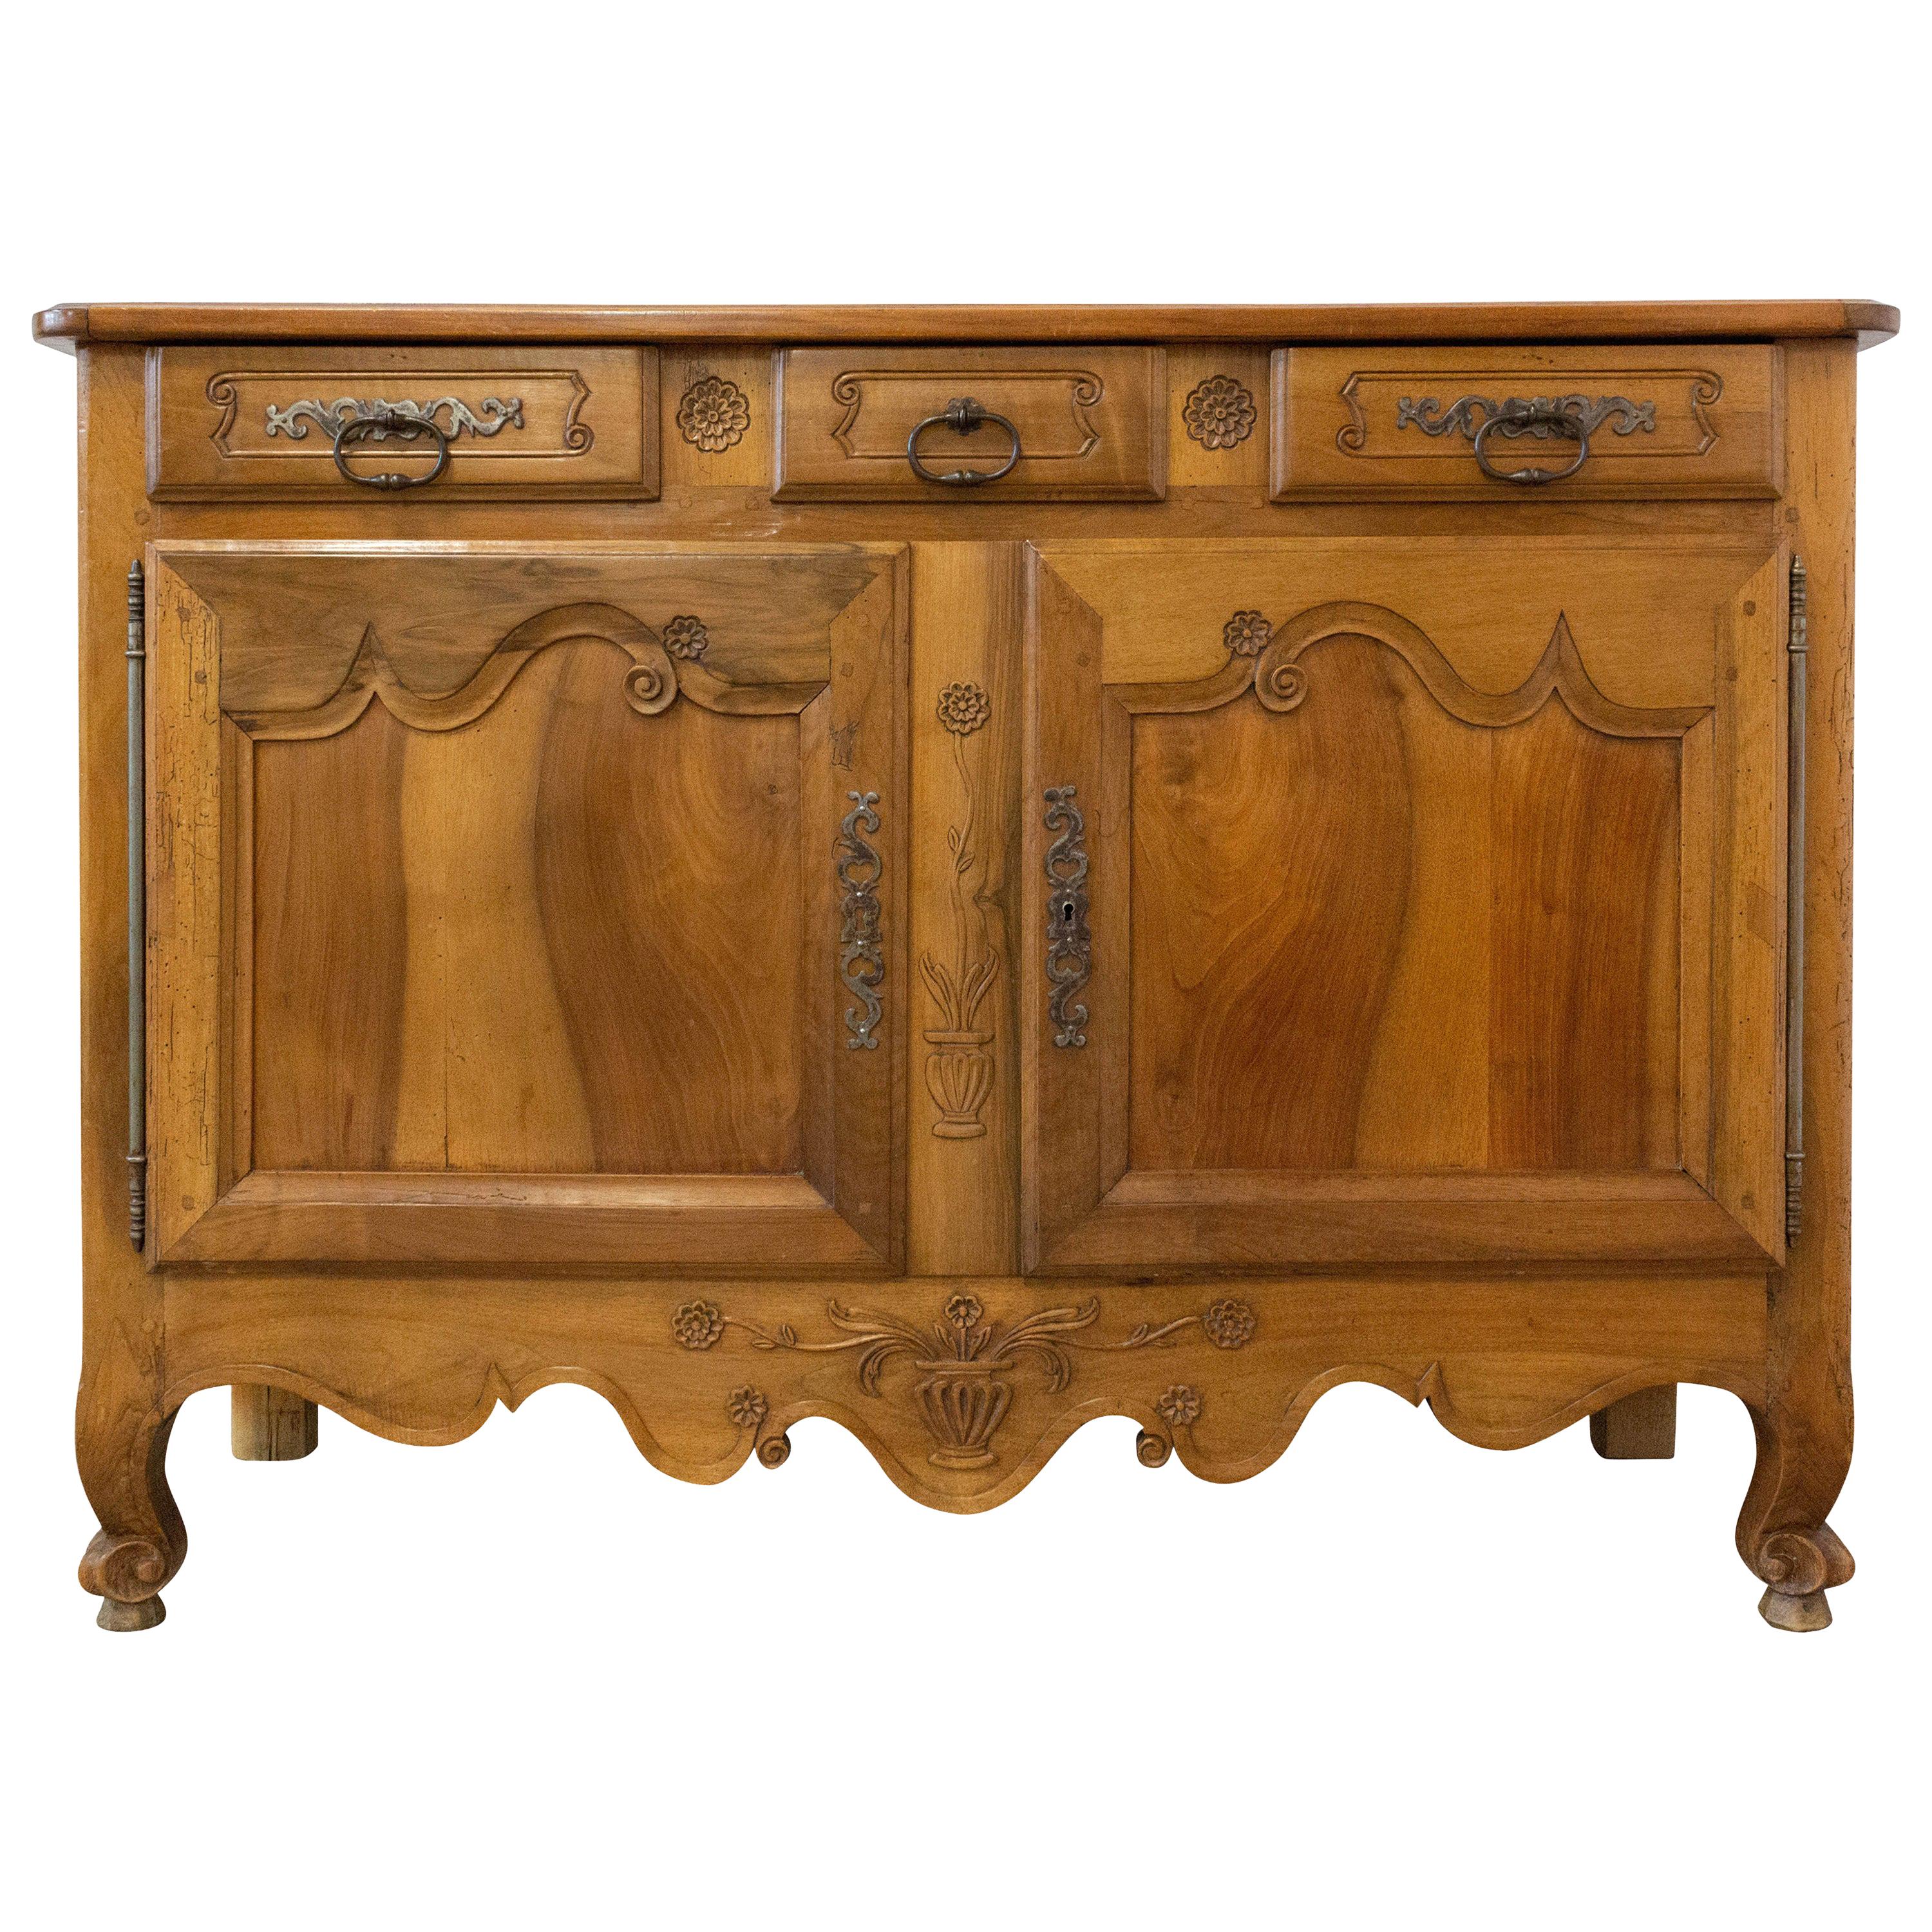 Antique Sideboard Dresser French Louis XV Carved Walnut Buffet, 19th Century For Sale